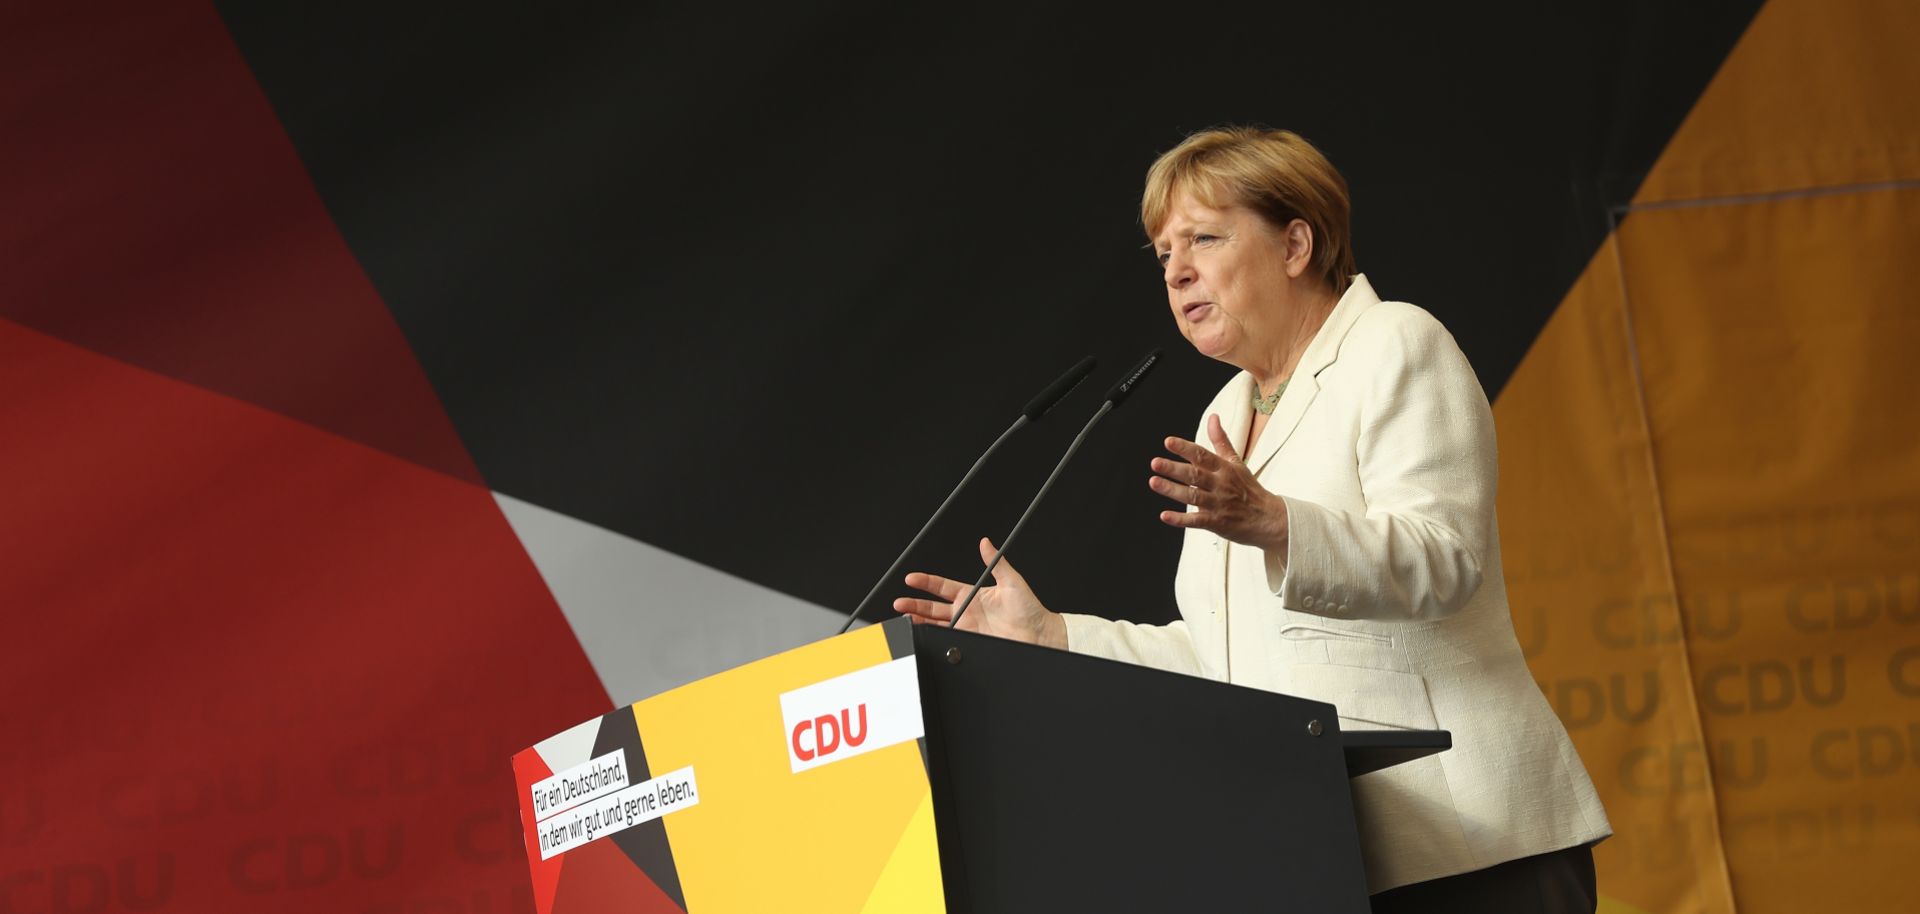 Chancellor Angela Merkel is expected to win a fourth term in Germany's parliamentary elections Sept. 24. The big question is how many seats in the Bundestag, Germany's lower house of parliament, Merkel's Christian Democrat Union will win and what form a governing coalition will take.